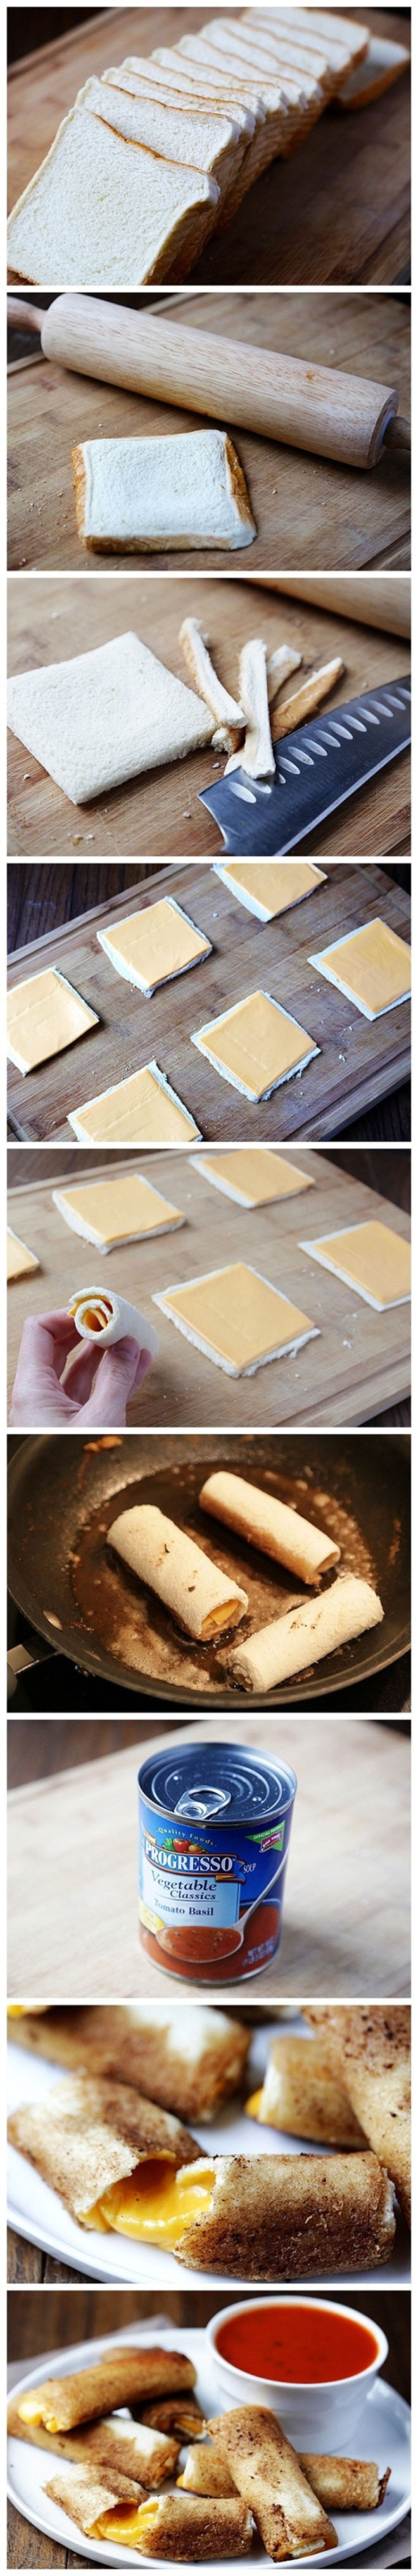 AD-Creative-Food-Hacks-That-Will-Change-The-Way-You-Cook-05